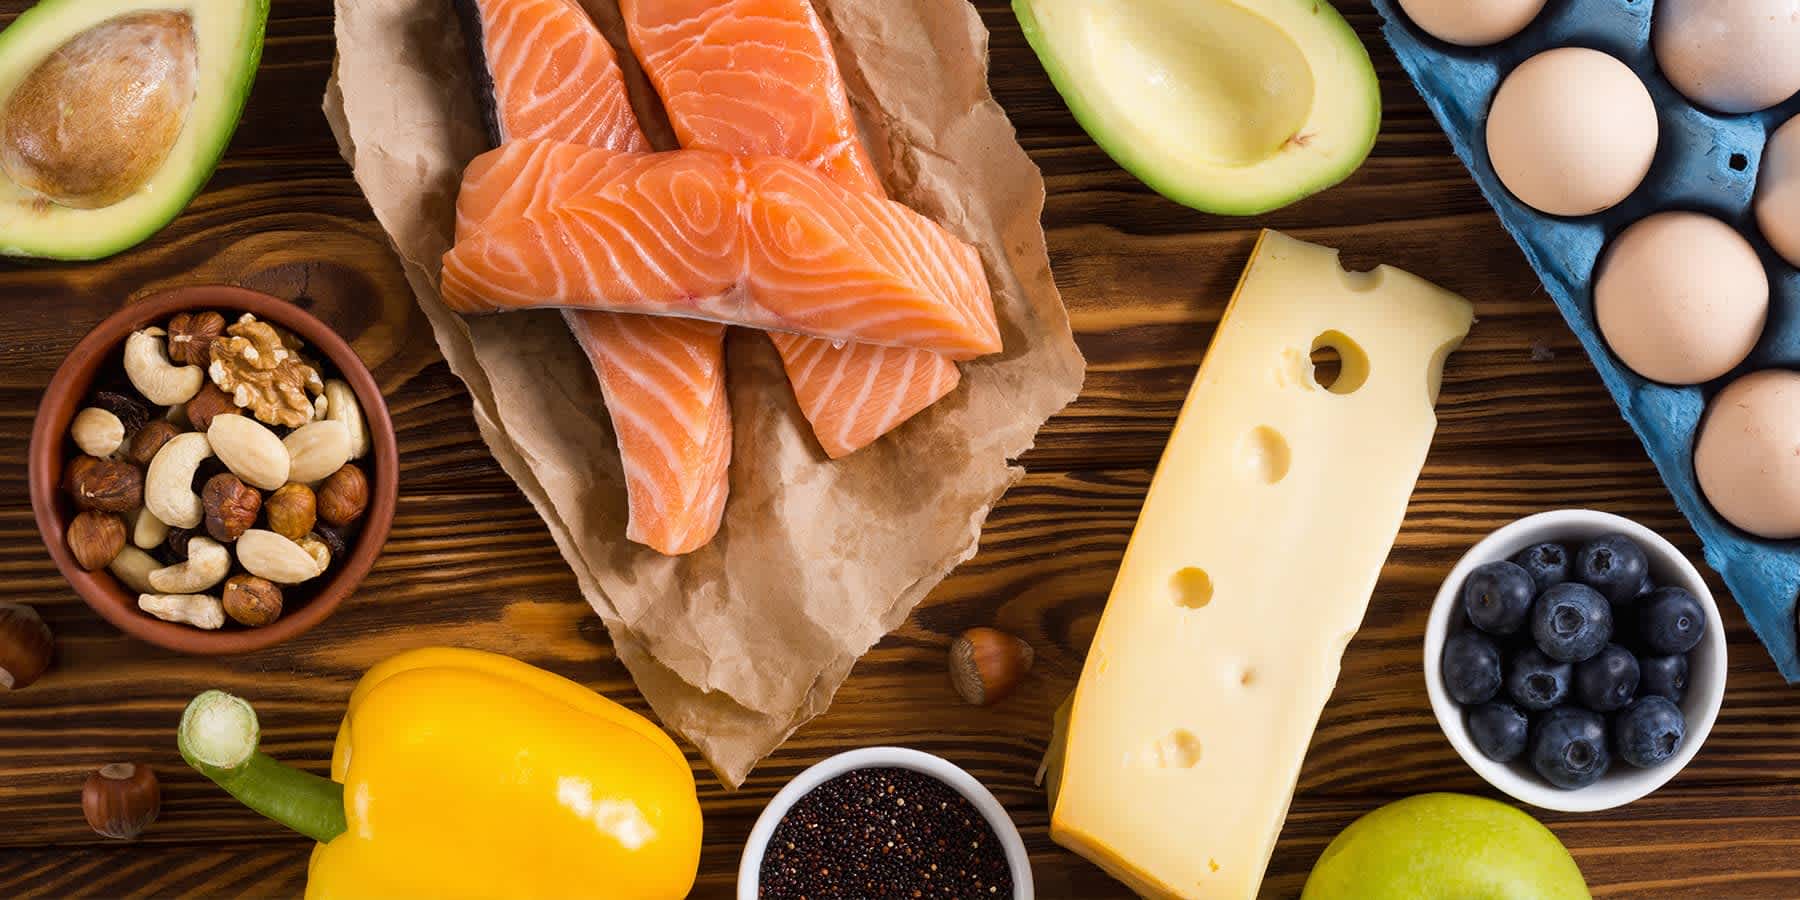 Various nutrient dense foods such as salmon and avocados on a table